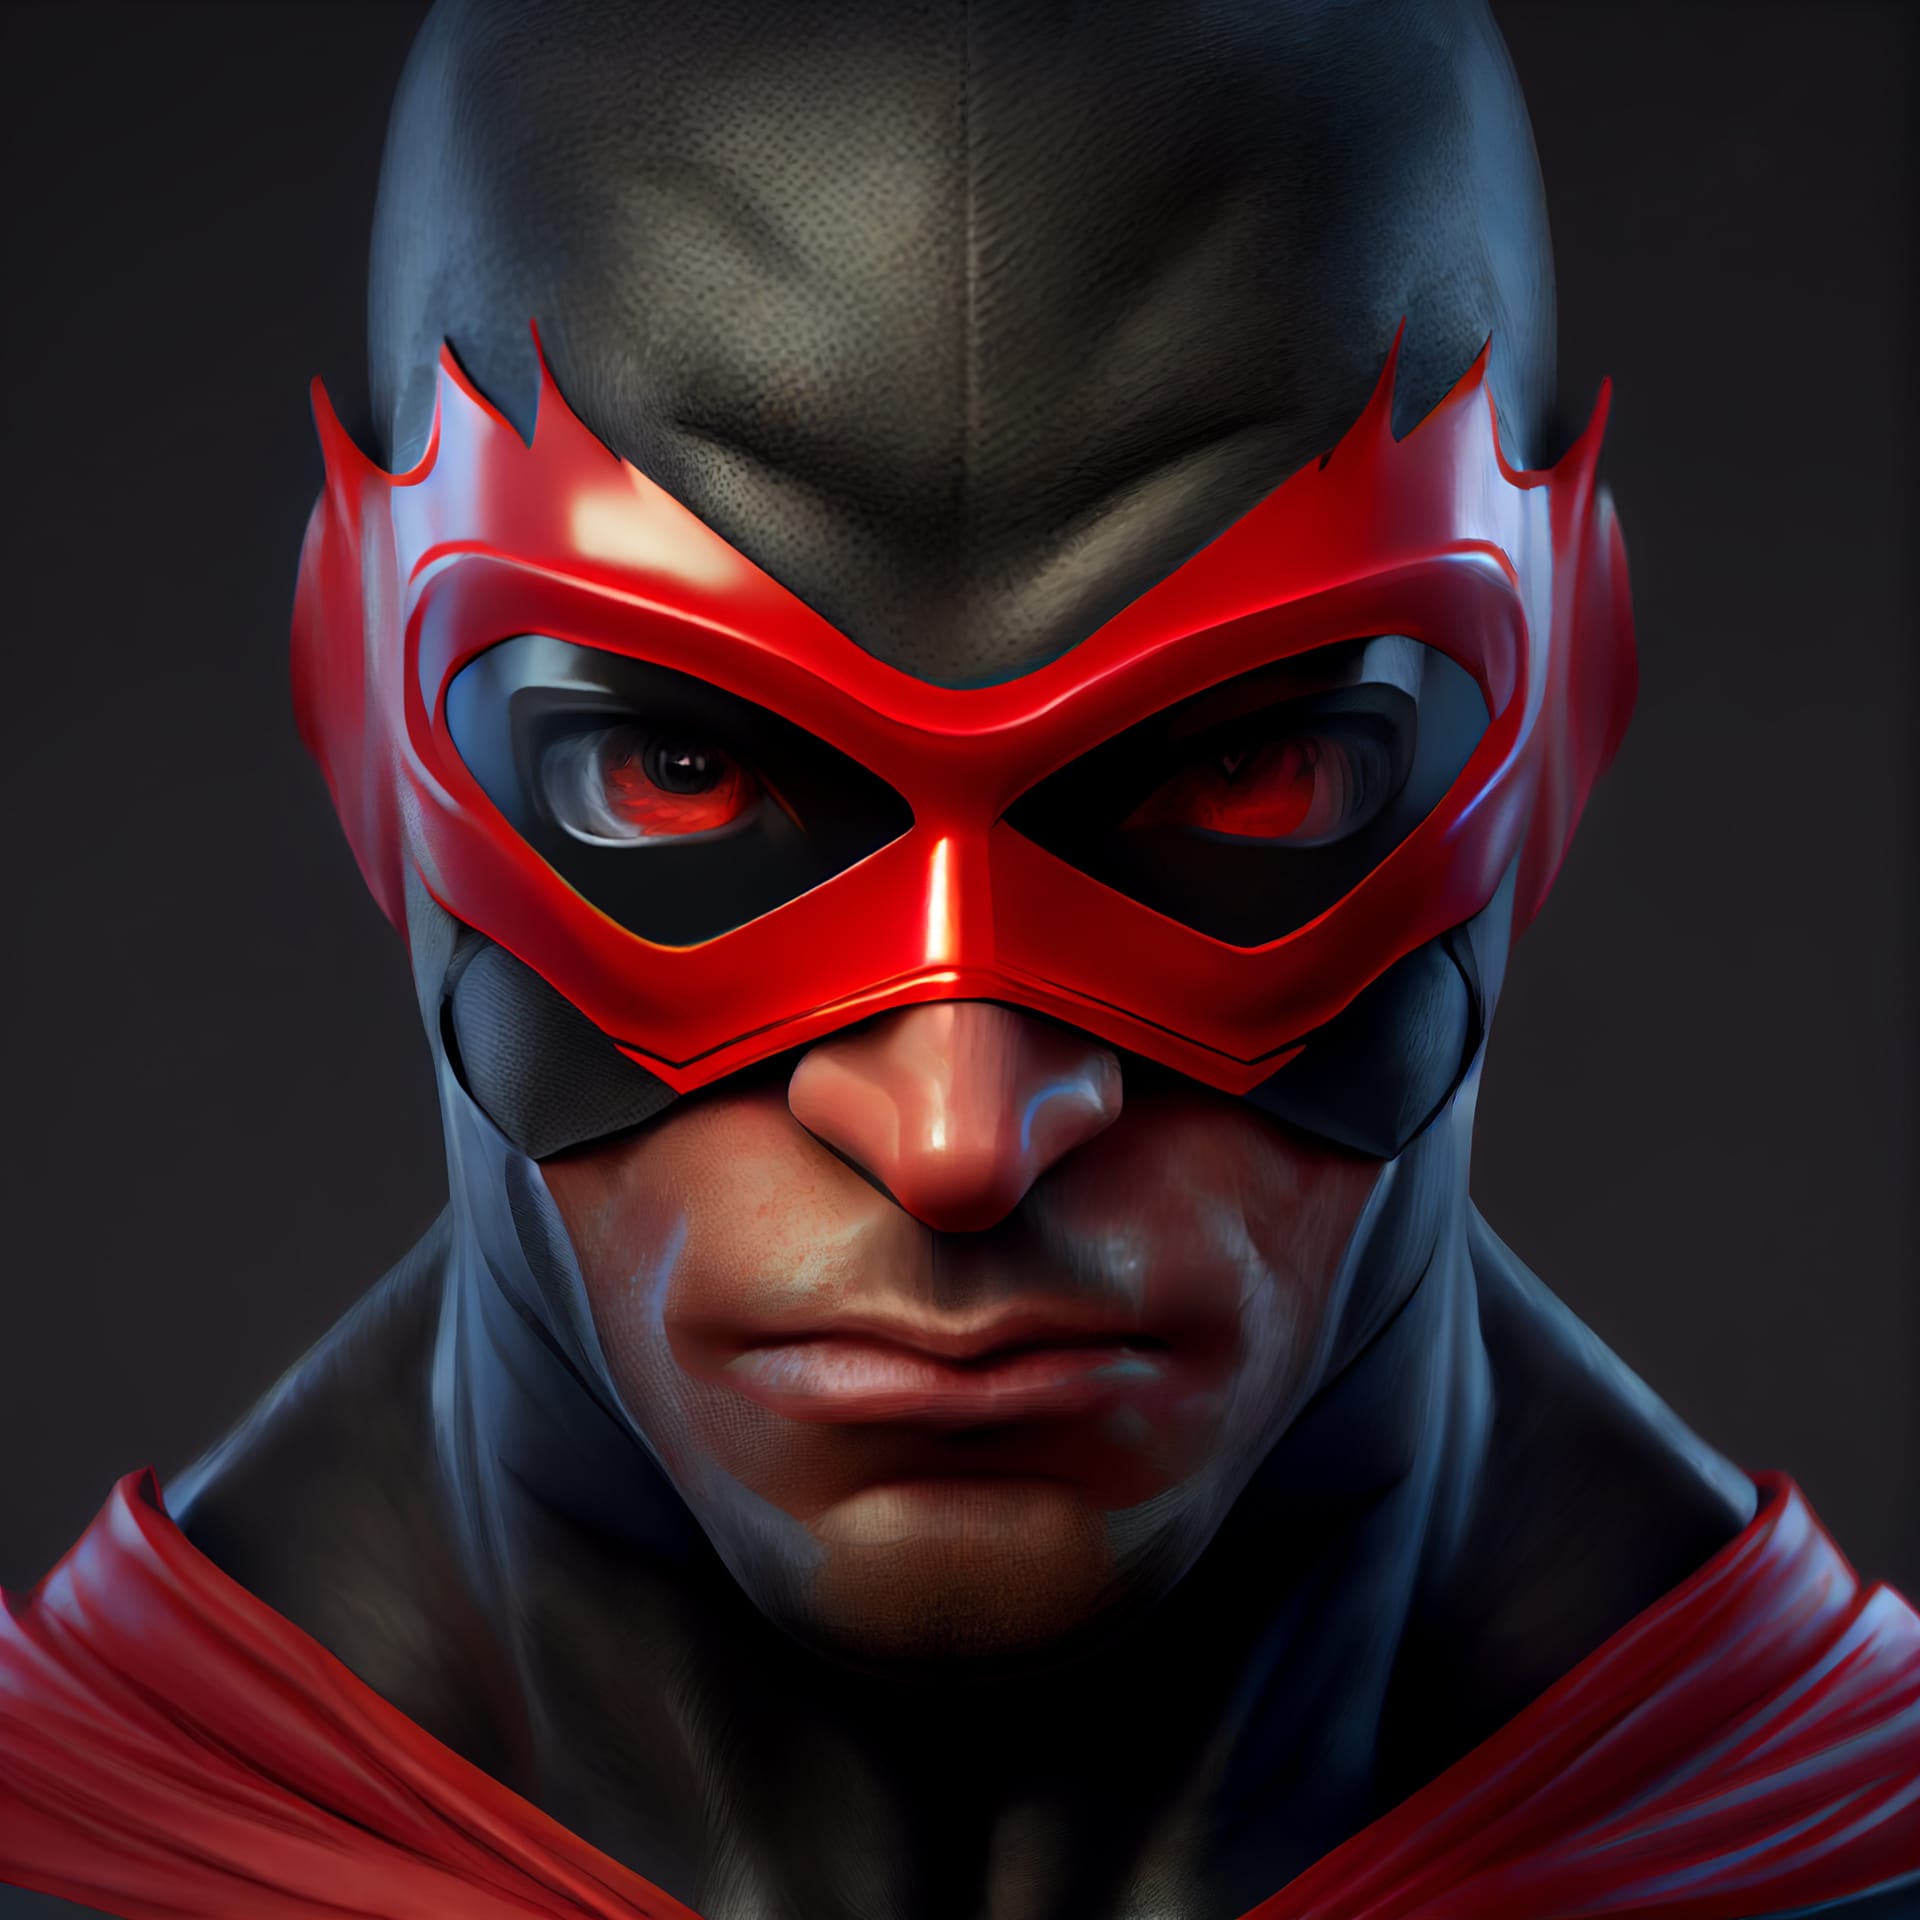 Realistic superhero man with superpowers 3d render illustration excellent image